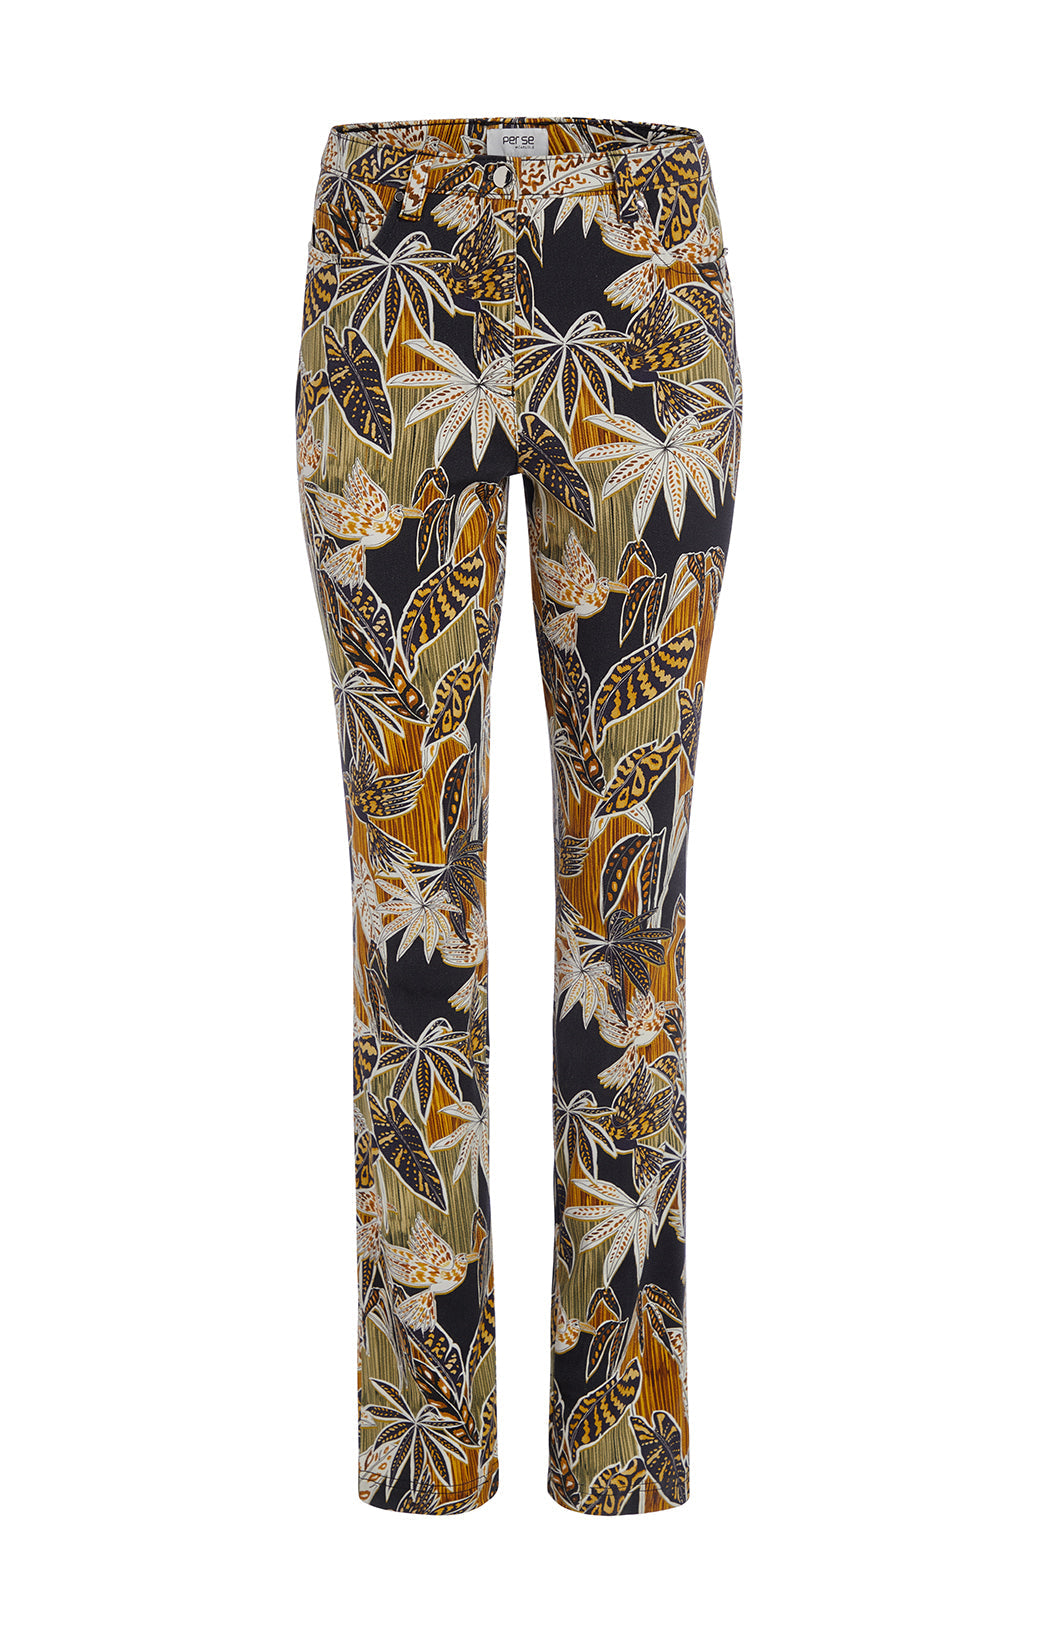 Alcazar - Tile-Printed Sateen Jeans - Product Image